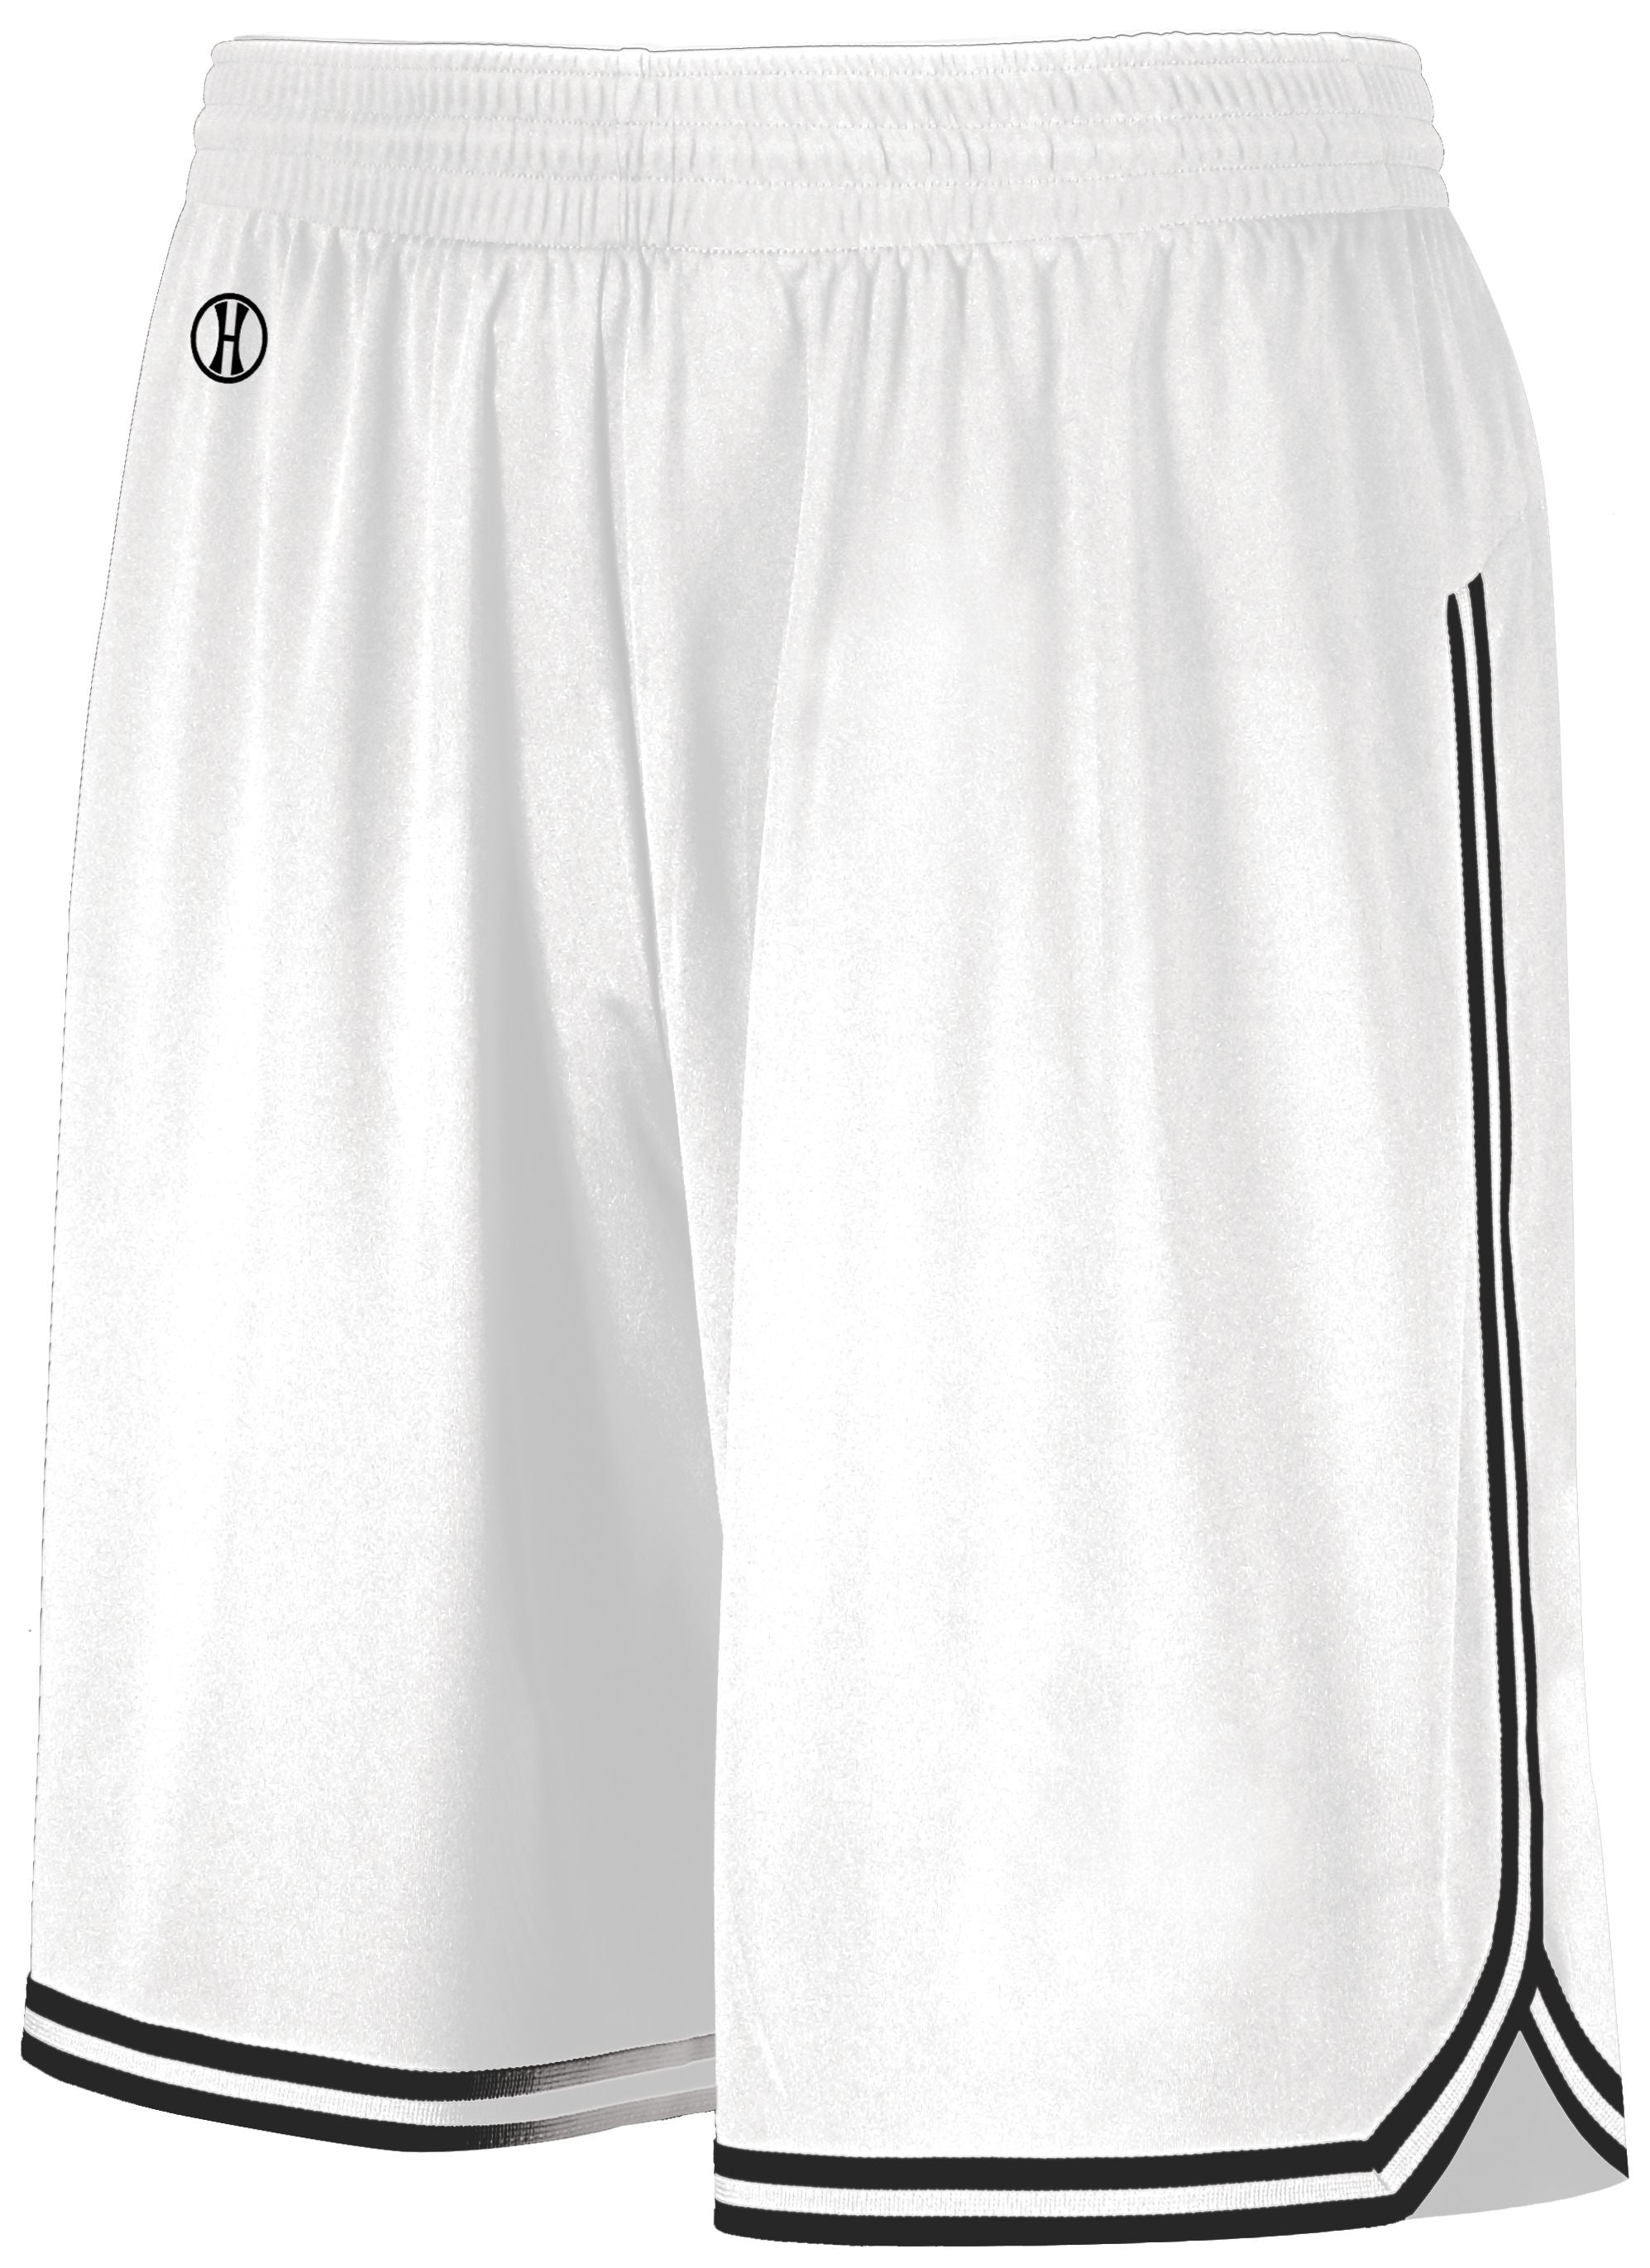 Holloway Retro Basketball Shorts in White/Black  -Part of the Adult, Adult-Shorts, Basketball, Holloway, All-Sports, All-Sports-1 product lines at KanaleyCreations.com